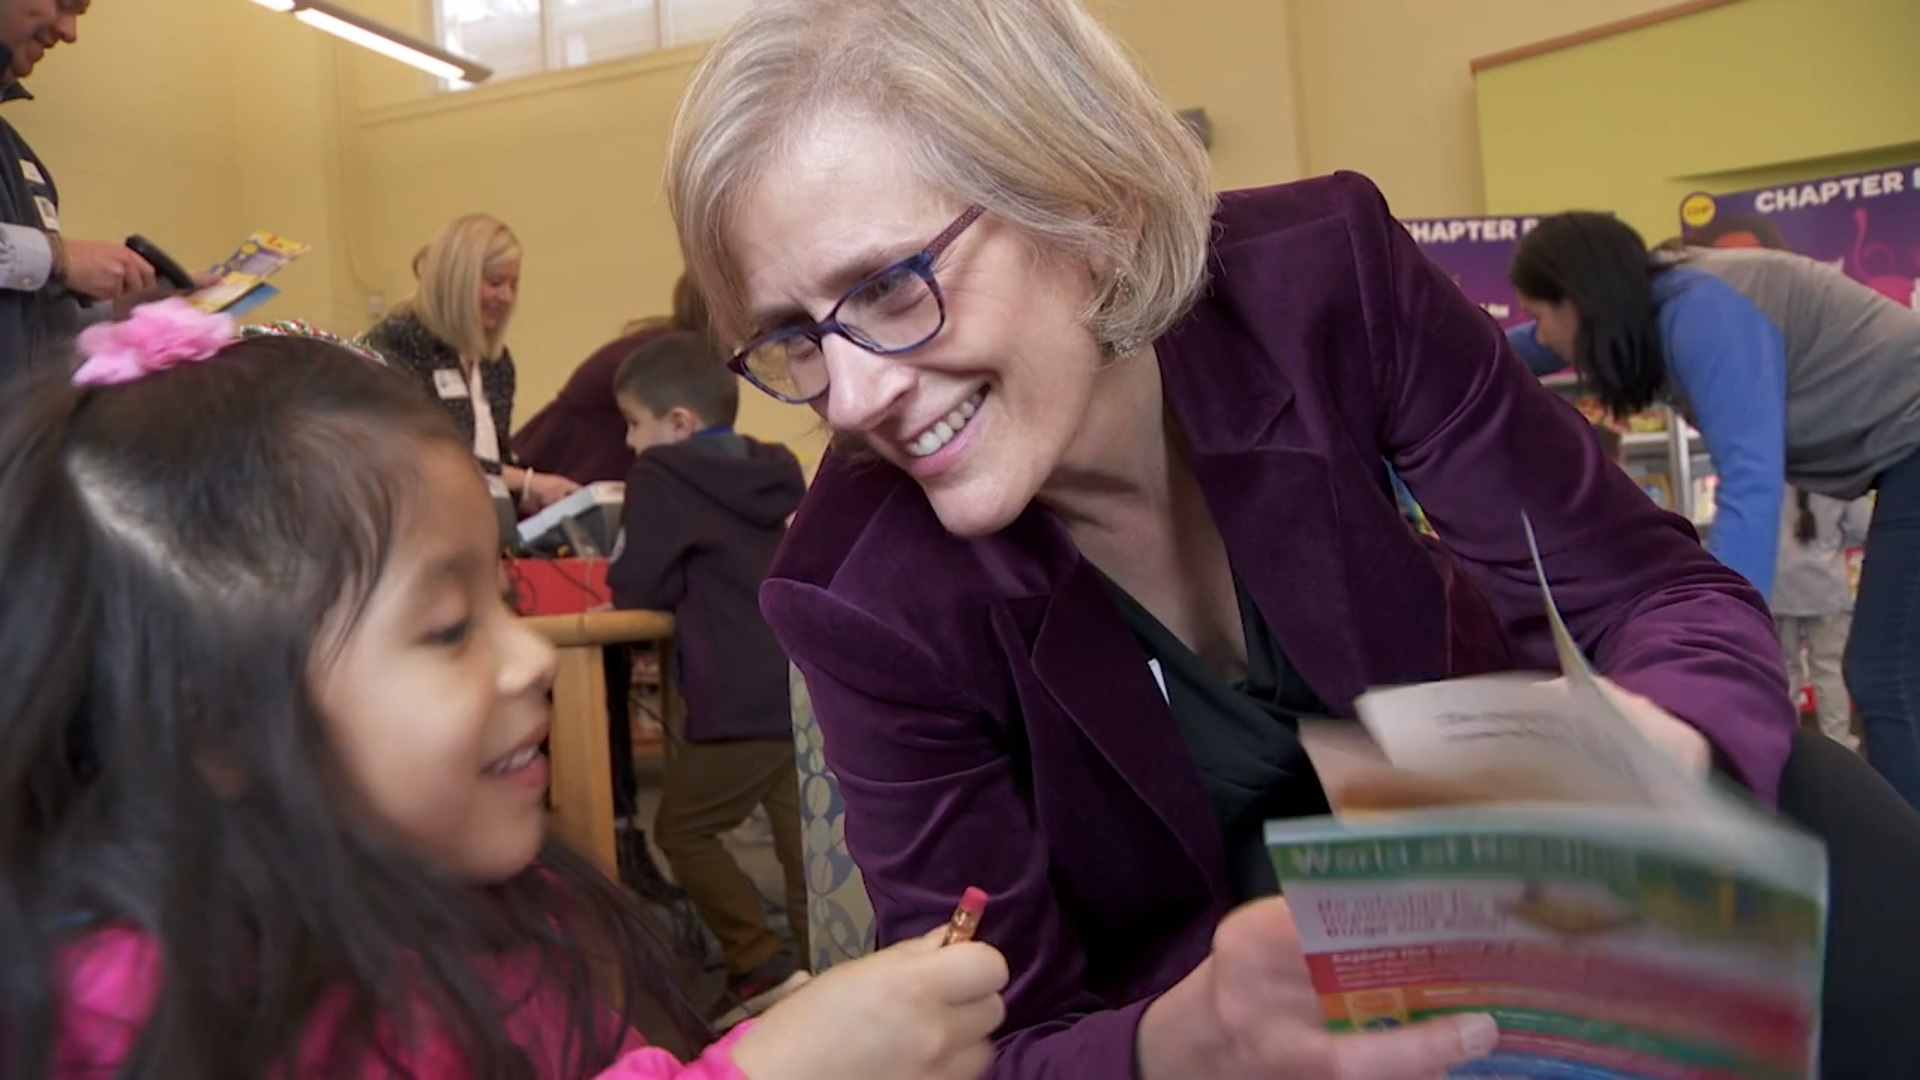 Scripps Howard Fund President and CEO Liz Carter reading to young girl during 